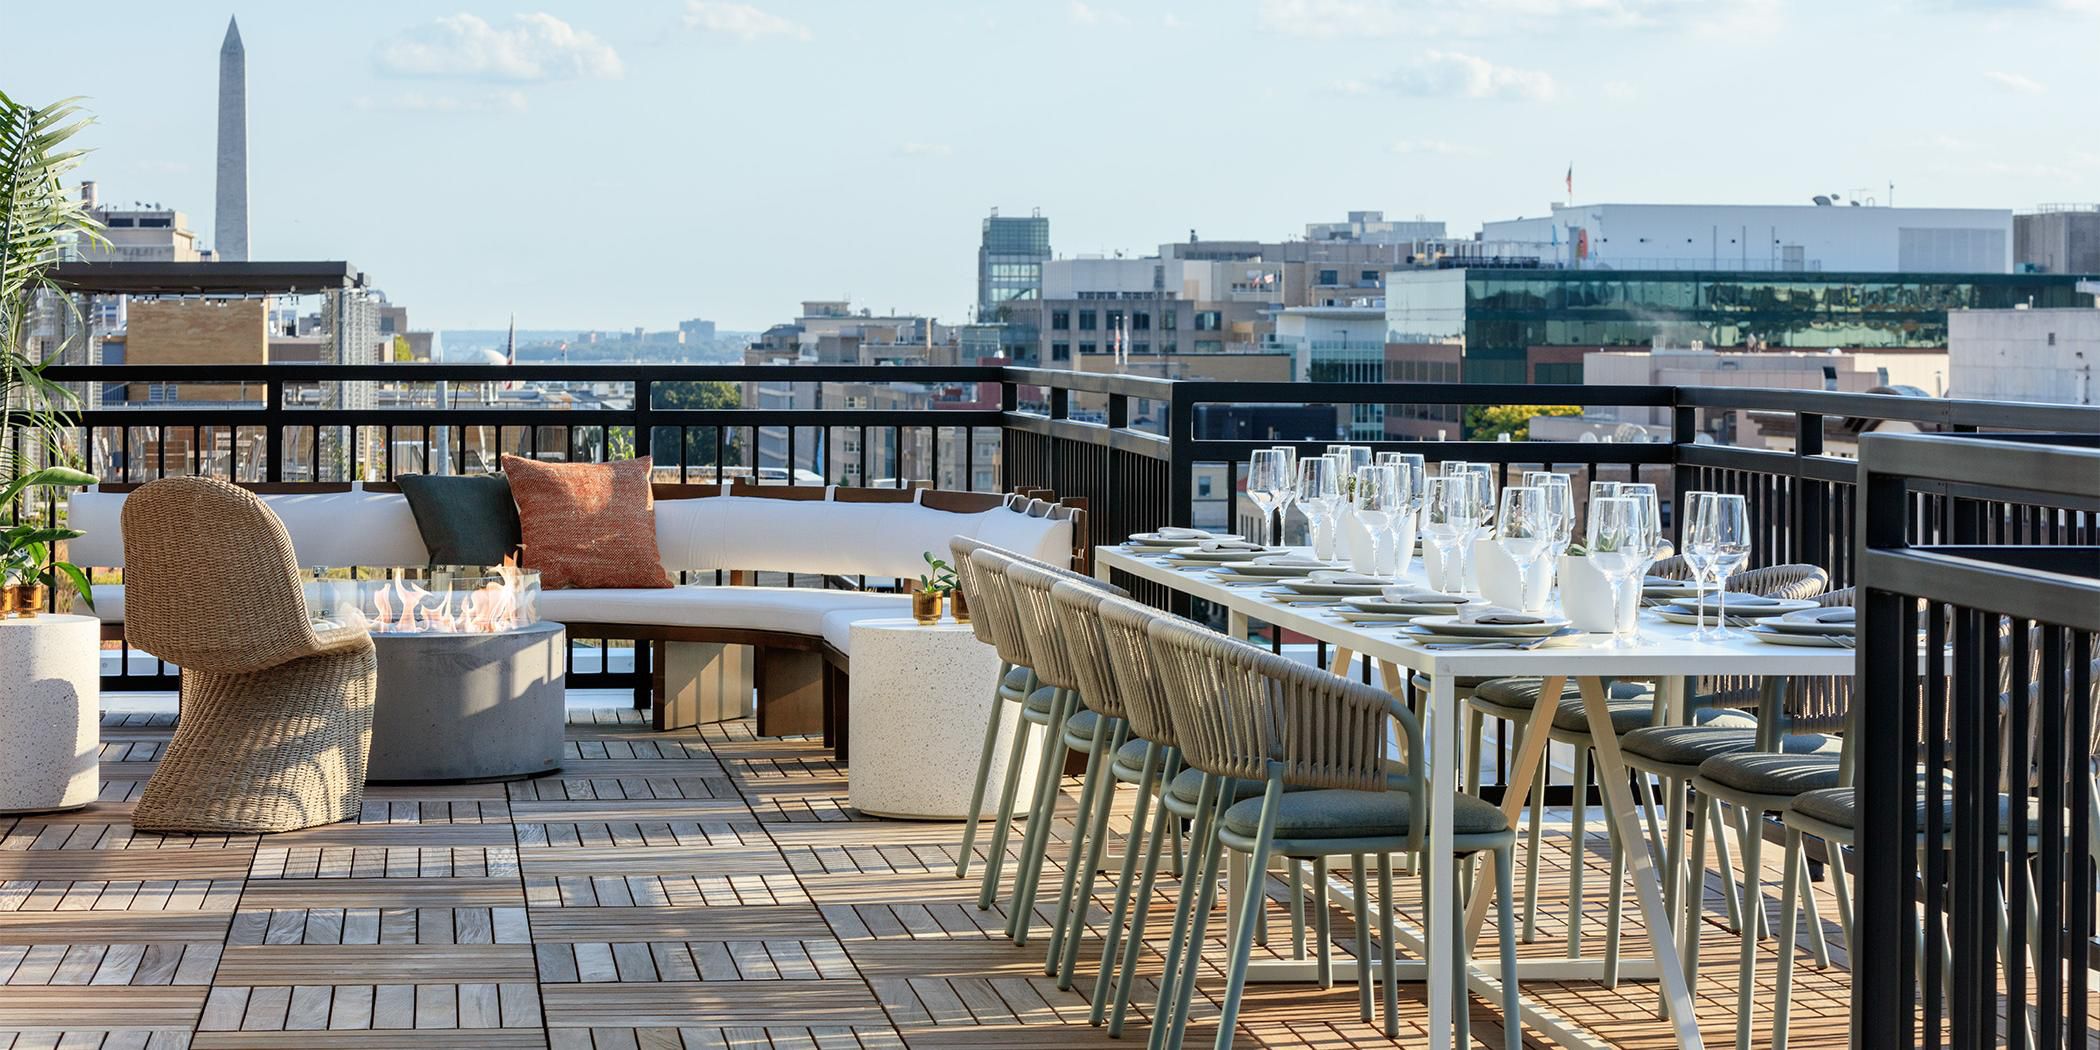 On a gorgeous rooftop in downtown DC, exchange vows against the backdrop of the city’s skyline, with the White House in the background adding historic flair. Given the unbeatable location, delicious French catering from Le Sel, and room blocks for your guests, the Kimpton Banneker Hotel is an easy place to say “I do.”